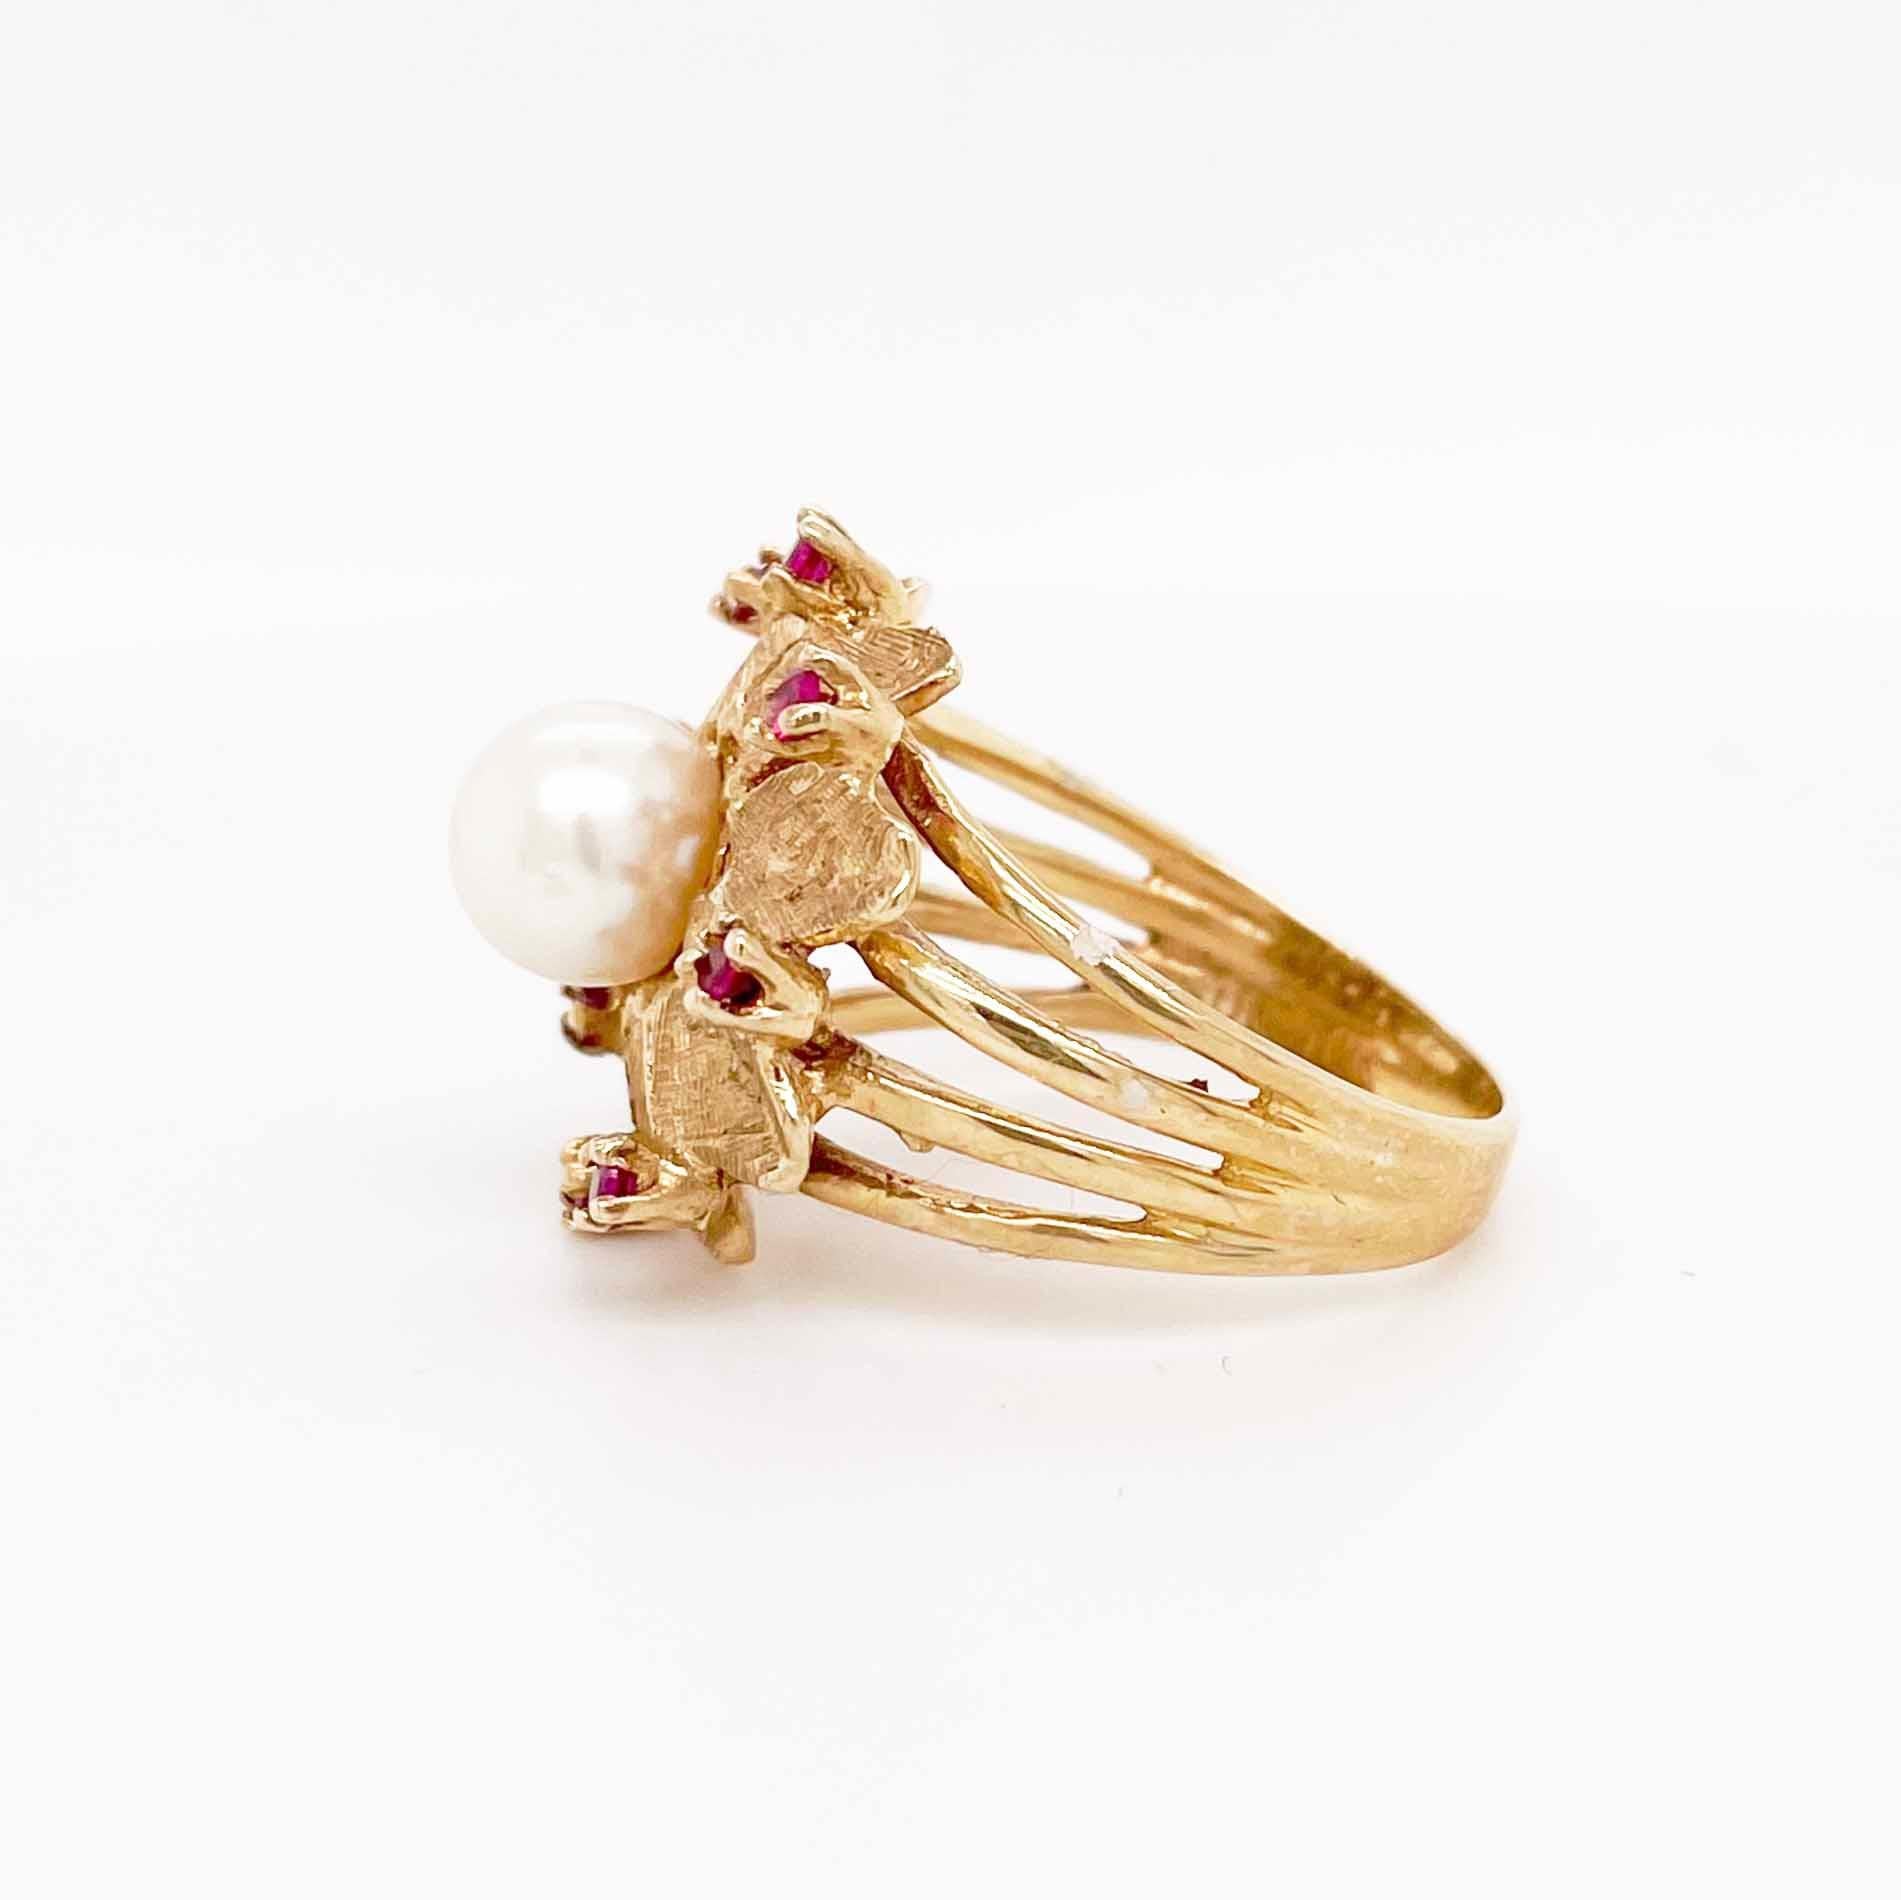 Genuine rubies and genuine, cultured peals go well together in this ring that does a great job of combining fun with classy. The flower made of gold is impressive on its own and made even more beautiful with a pearl center and ruby halo. It's a